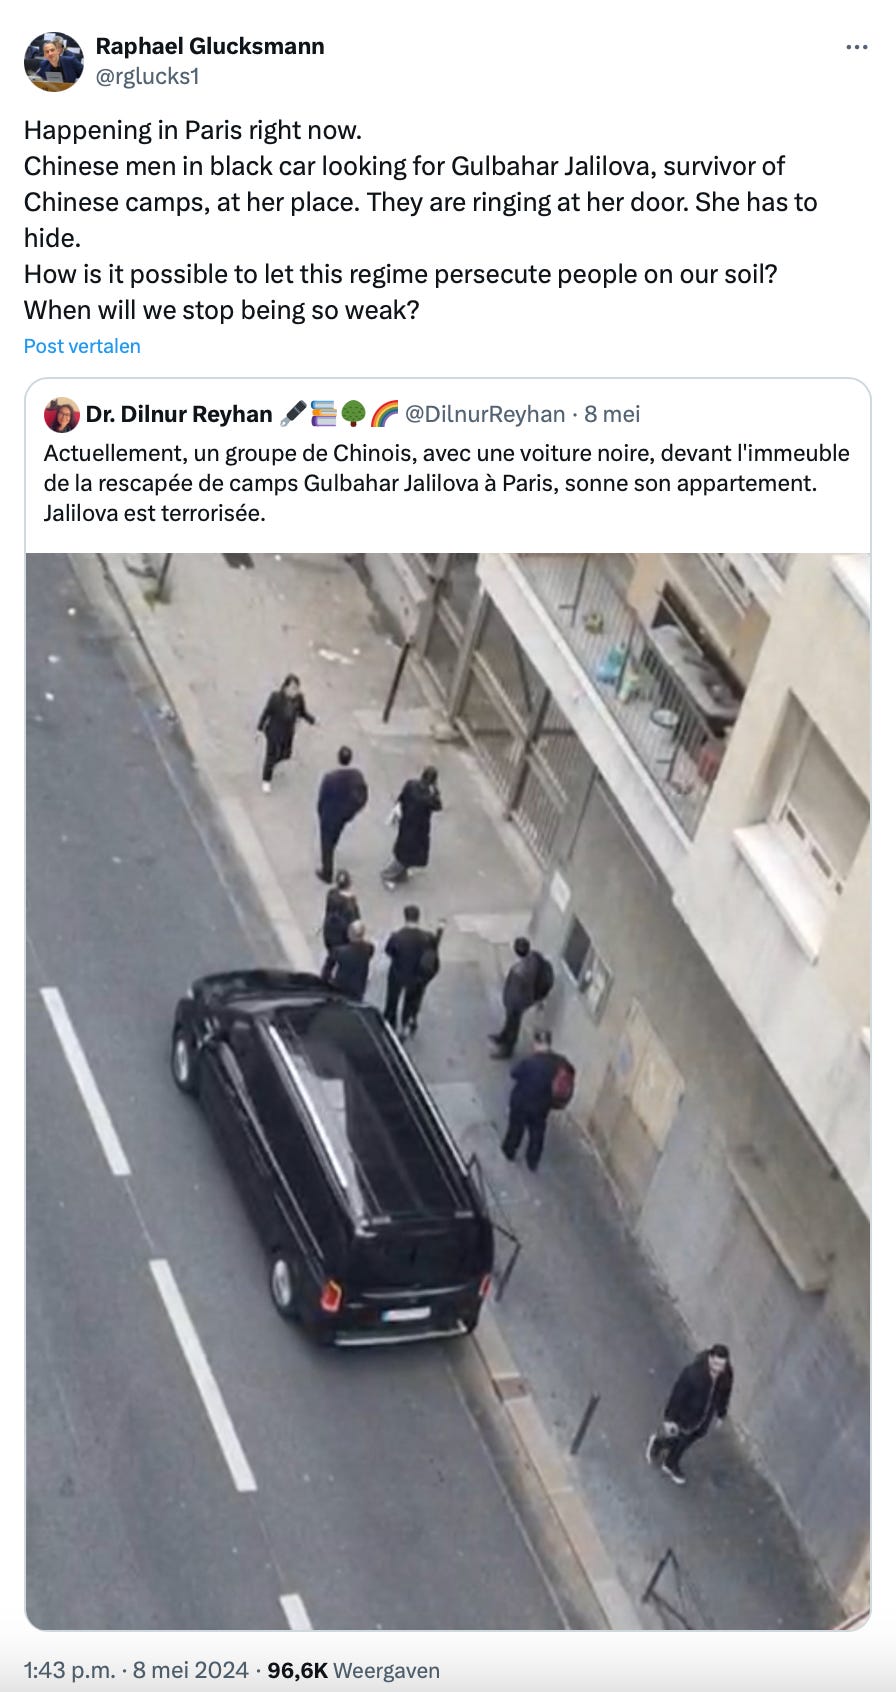 ‘Happening in Paris right now. Chinese men in black car looking for Gulbahar Jalilova, survivor of Chinese camps, at her place. They are ringing at her door. She has to hide.How is it possible to let this regime persecute people on our soil? When will we stop being so weak?’ – Raphael Glucksmann MEP, Twitter